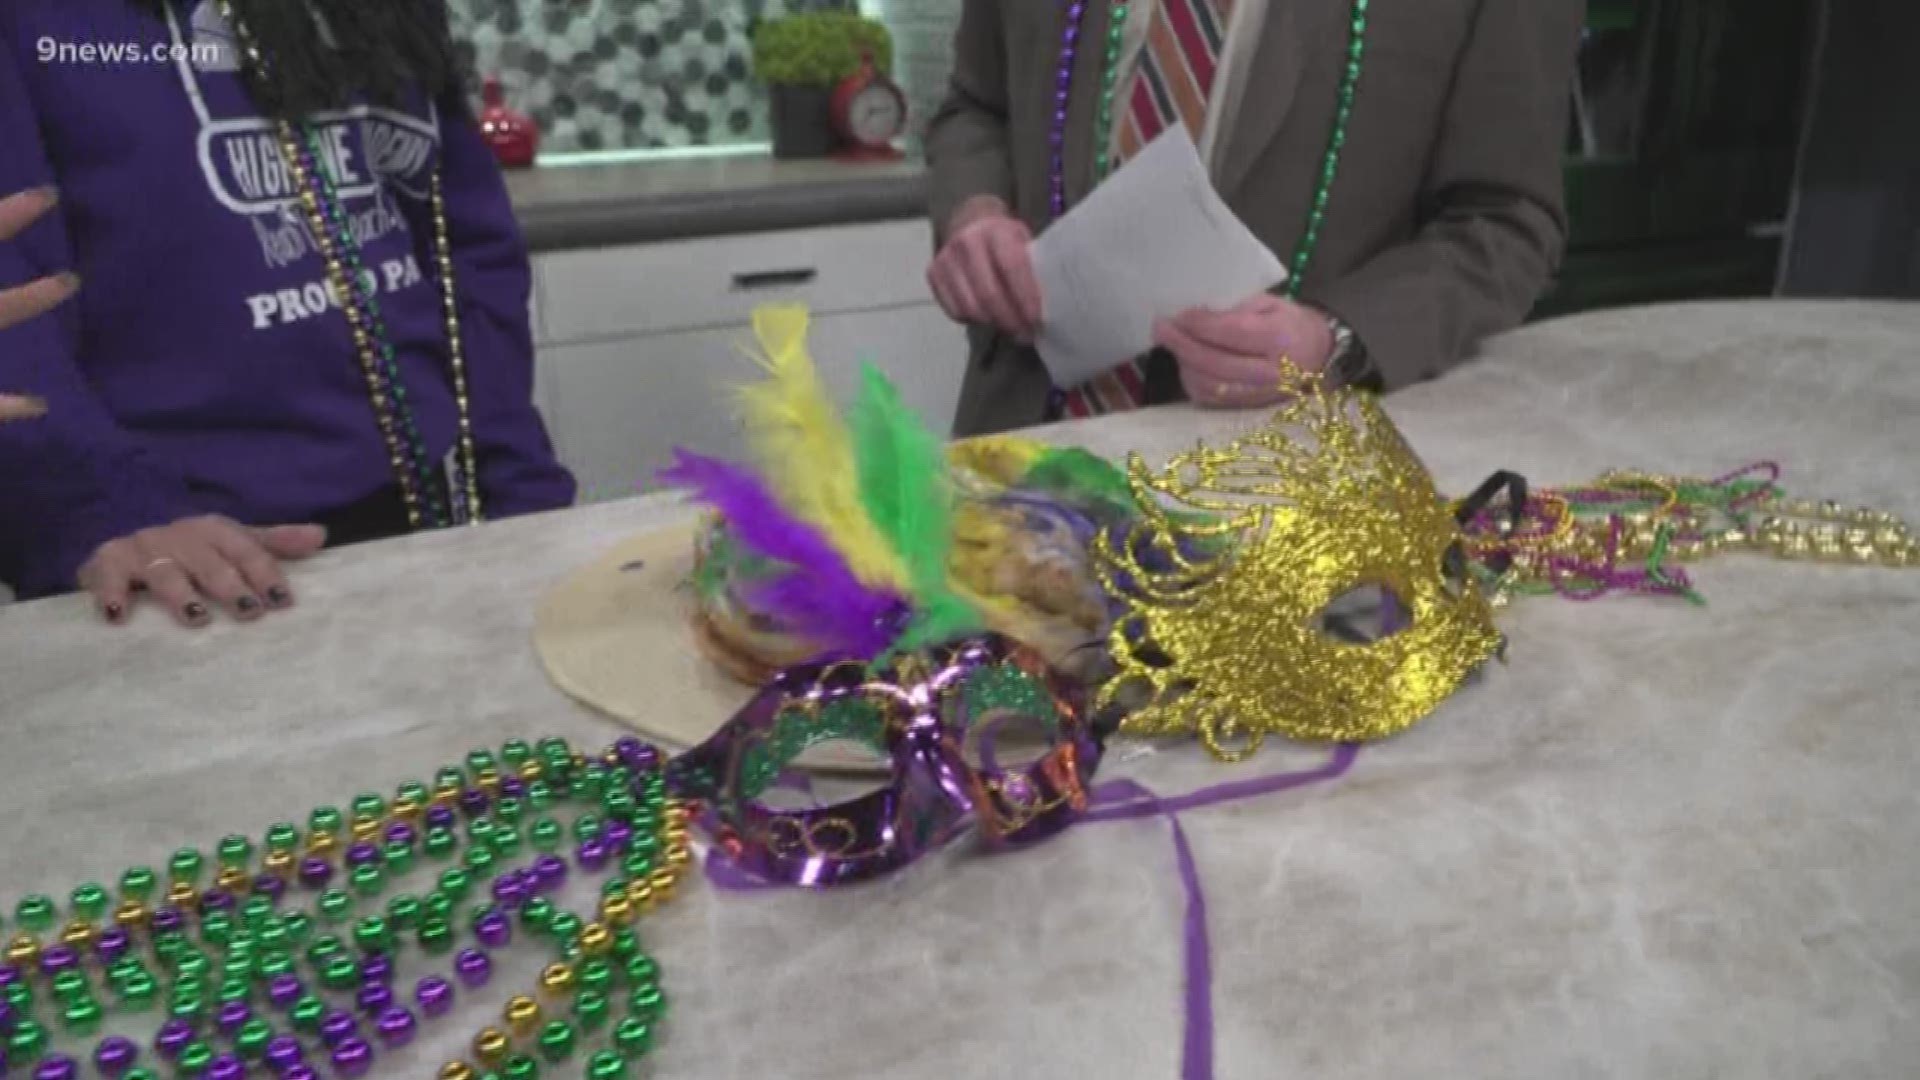 Mardi Gras may be over, but that doesn't mean you can't celebrate again. This time it's for a good cause.